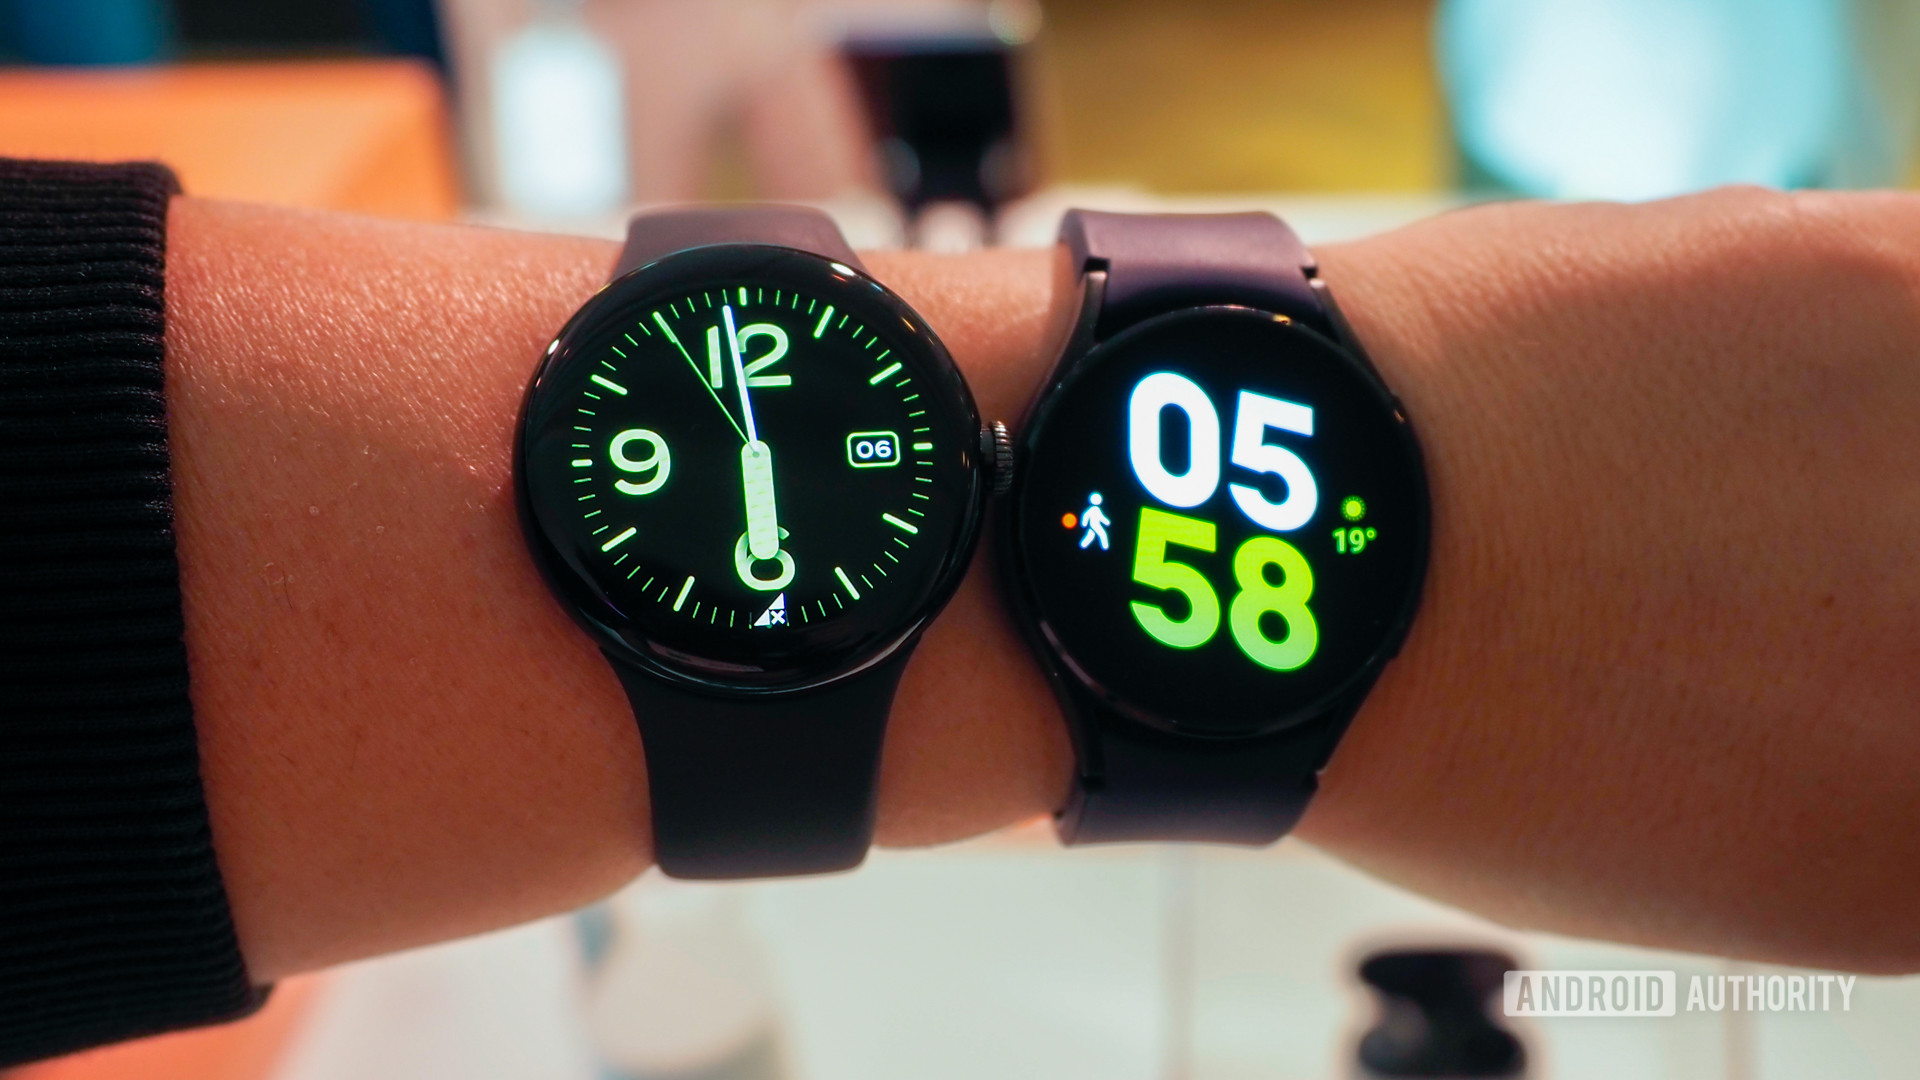 Google Pixel watches on the wrist